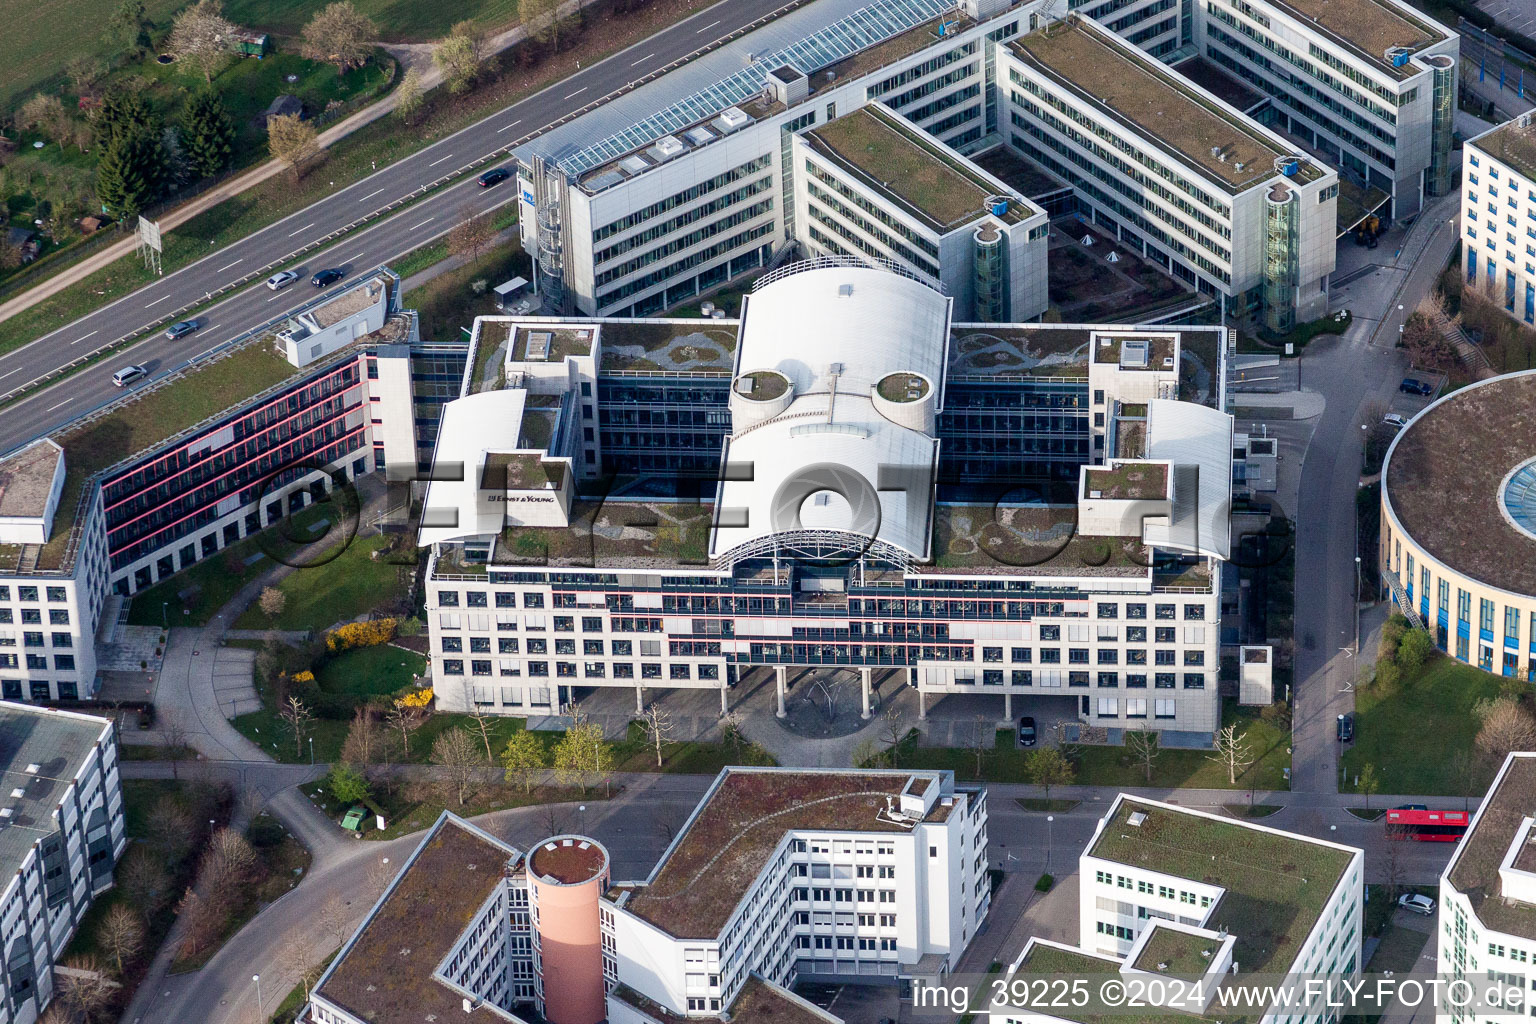 Aerial view of Administration building of the company of Dr. Ing. h.c. F. Porsche AG in Weilimdorf in the state Baden-Wurttemberg, Germany